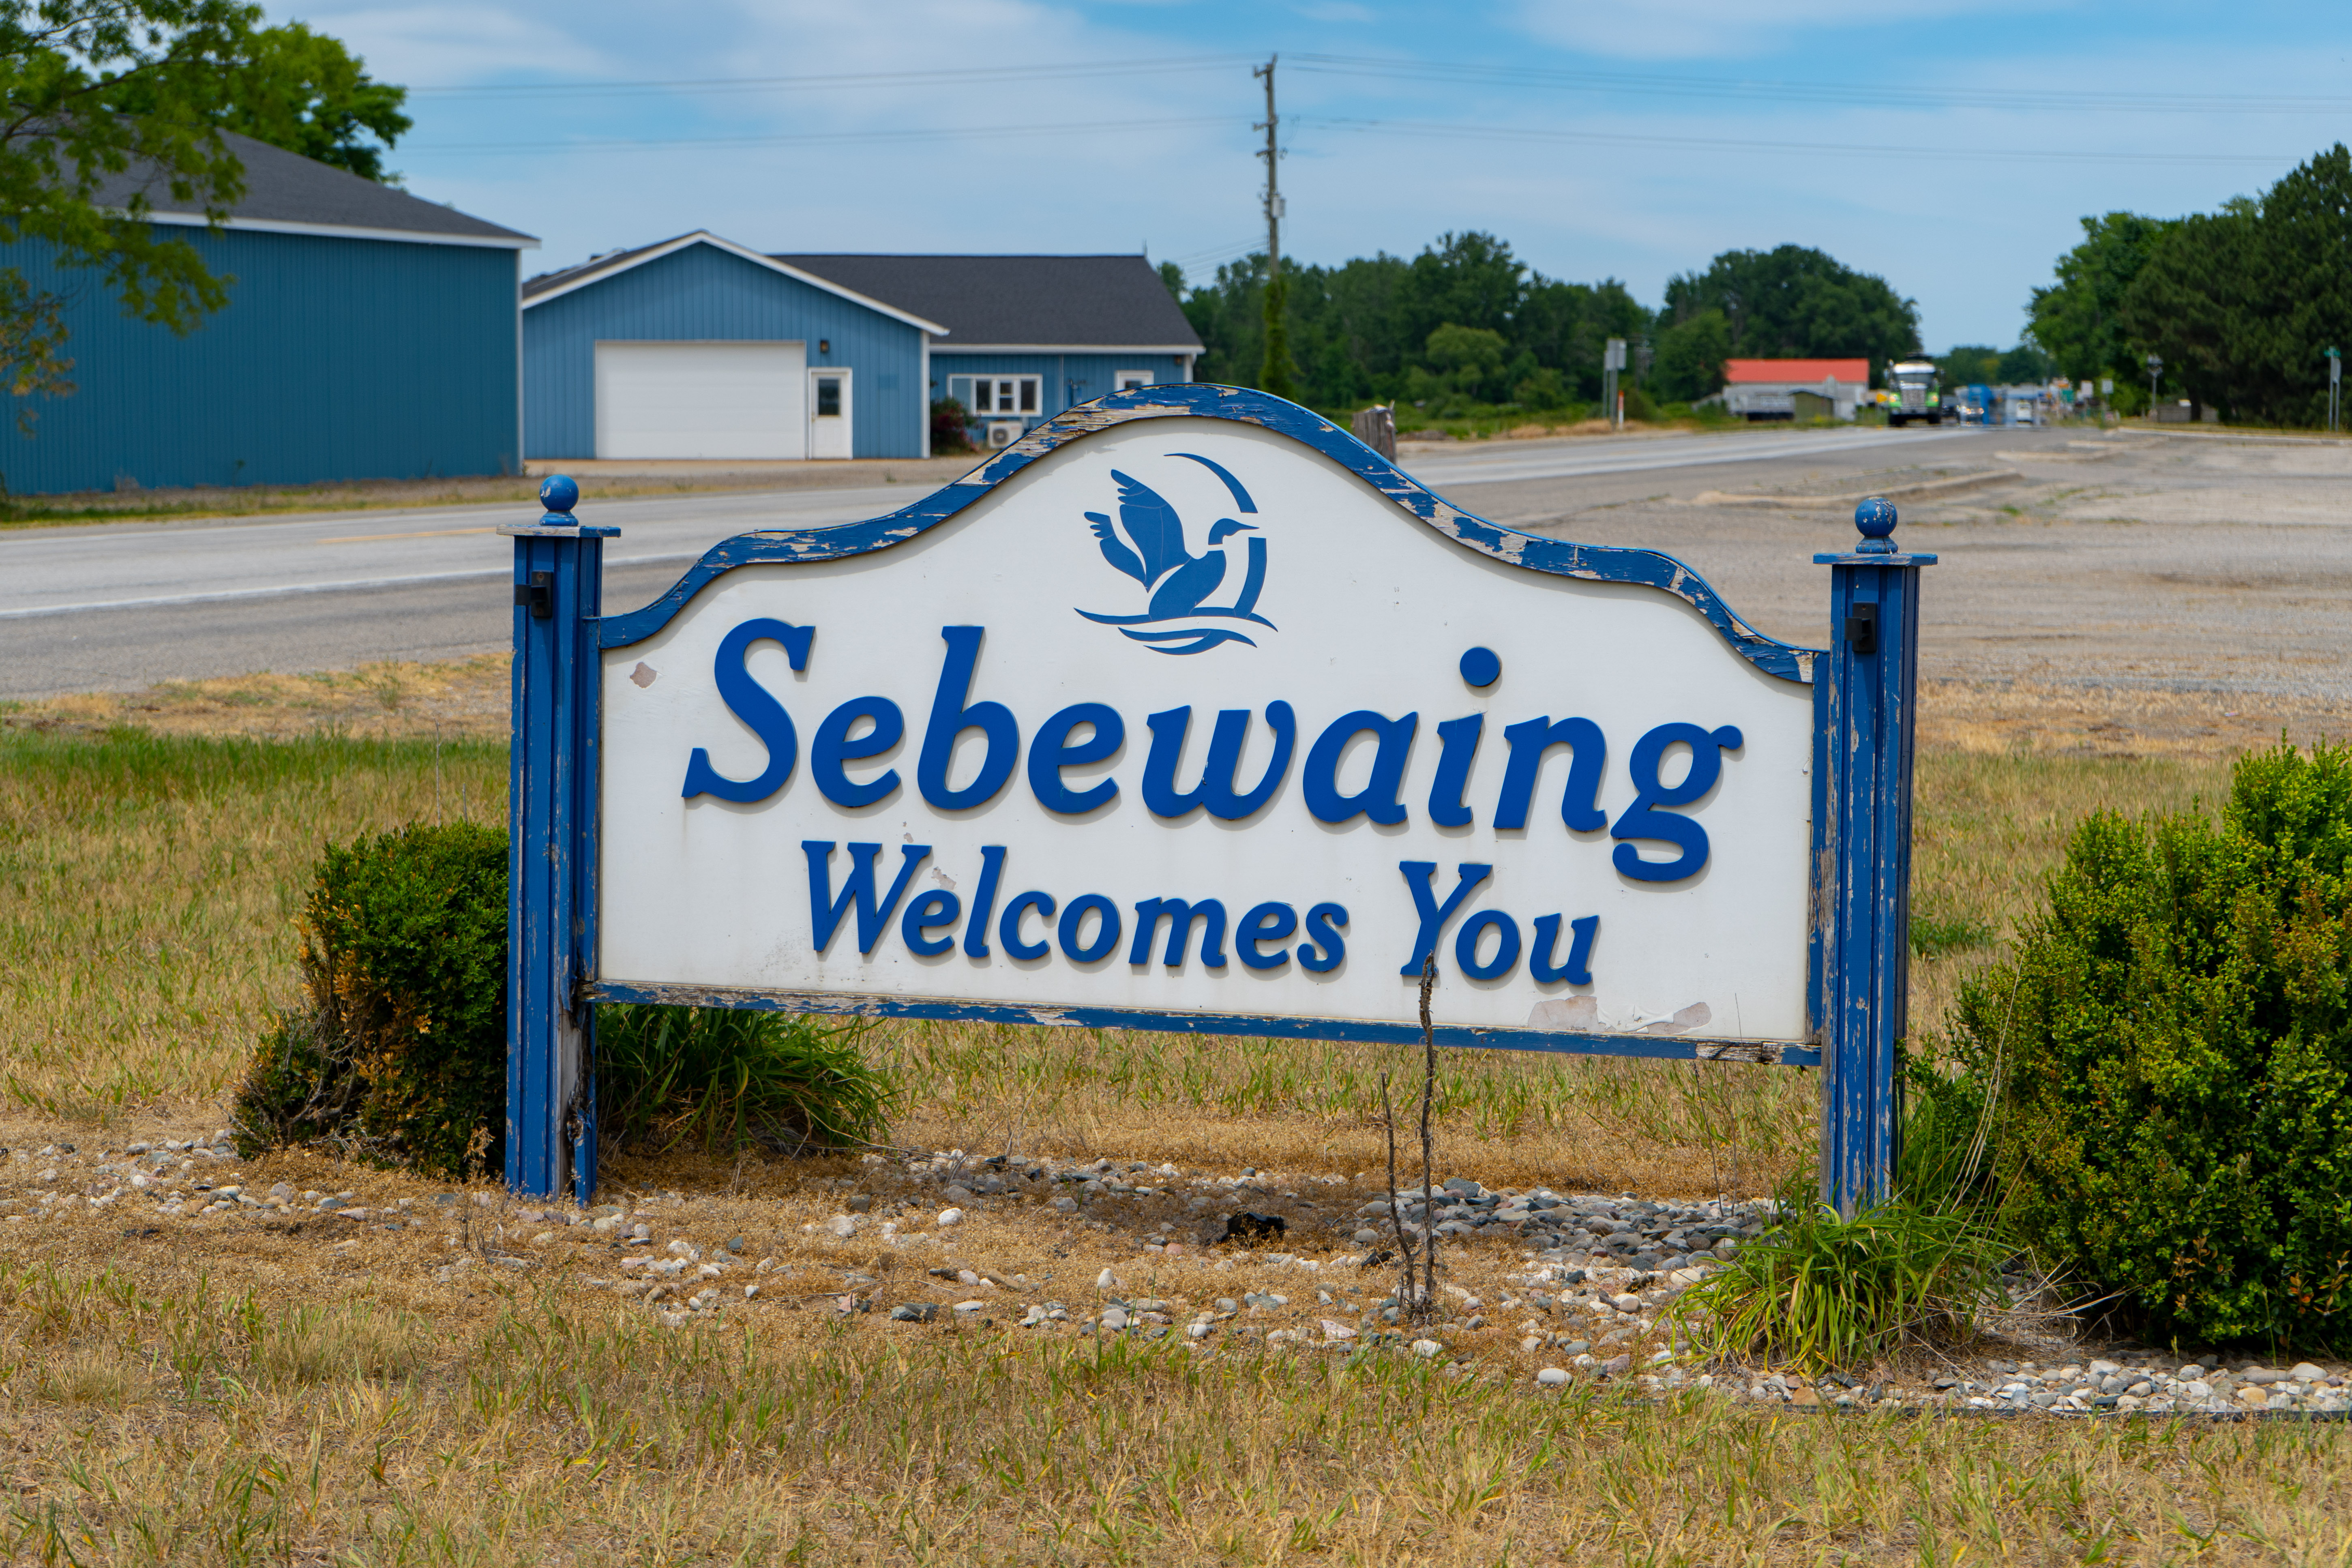 "Welcome to Sebewaing" sign.